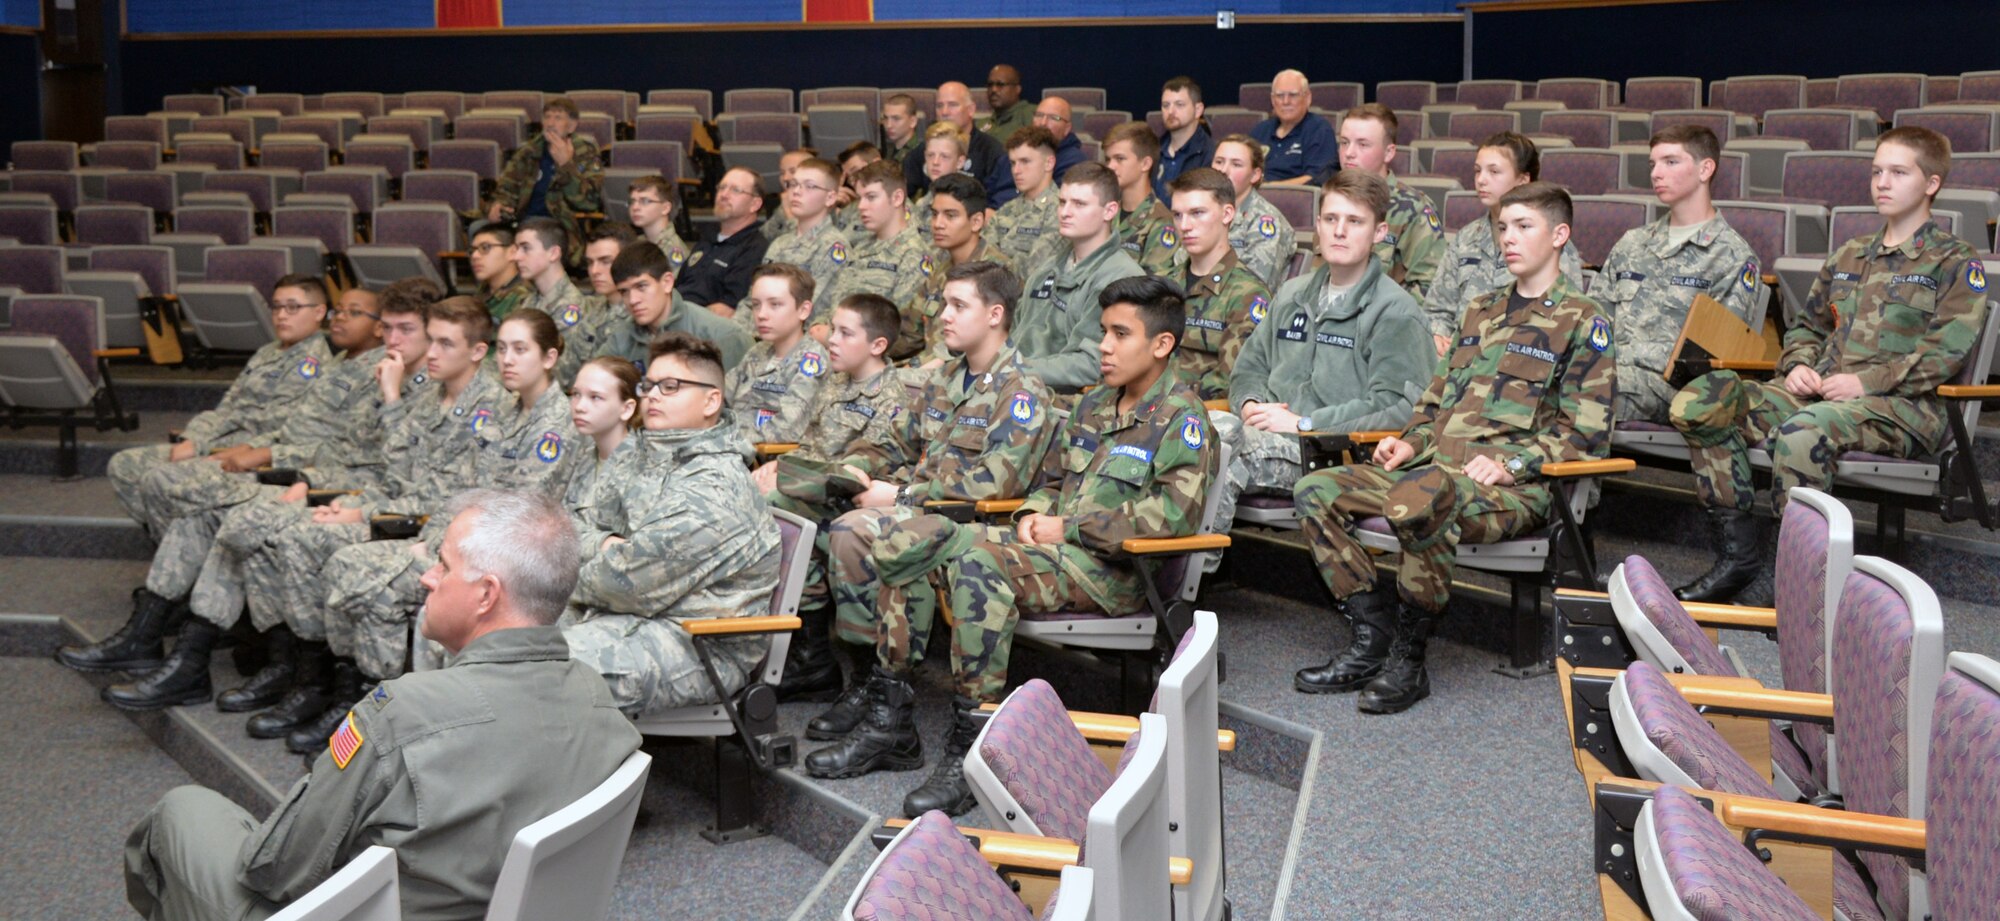 Civil Air Patrol cadets and leaders listen as Lt. Col. Matthew Van De Walle, 356th Airlift Squadron instructor pilot, presents the wing’s mission briefing at Joint Base San Antonio-Lackland, Texas March 12, 2019. The cadets visited the Alamo Wing for an incentive flight on a C-5M Super Galaxy.